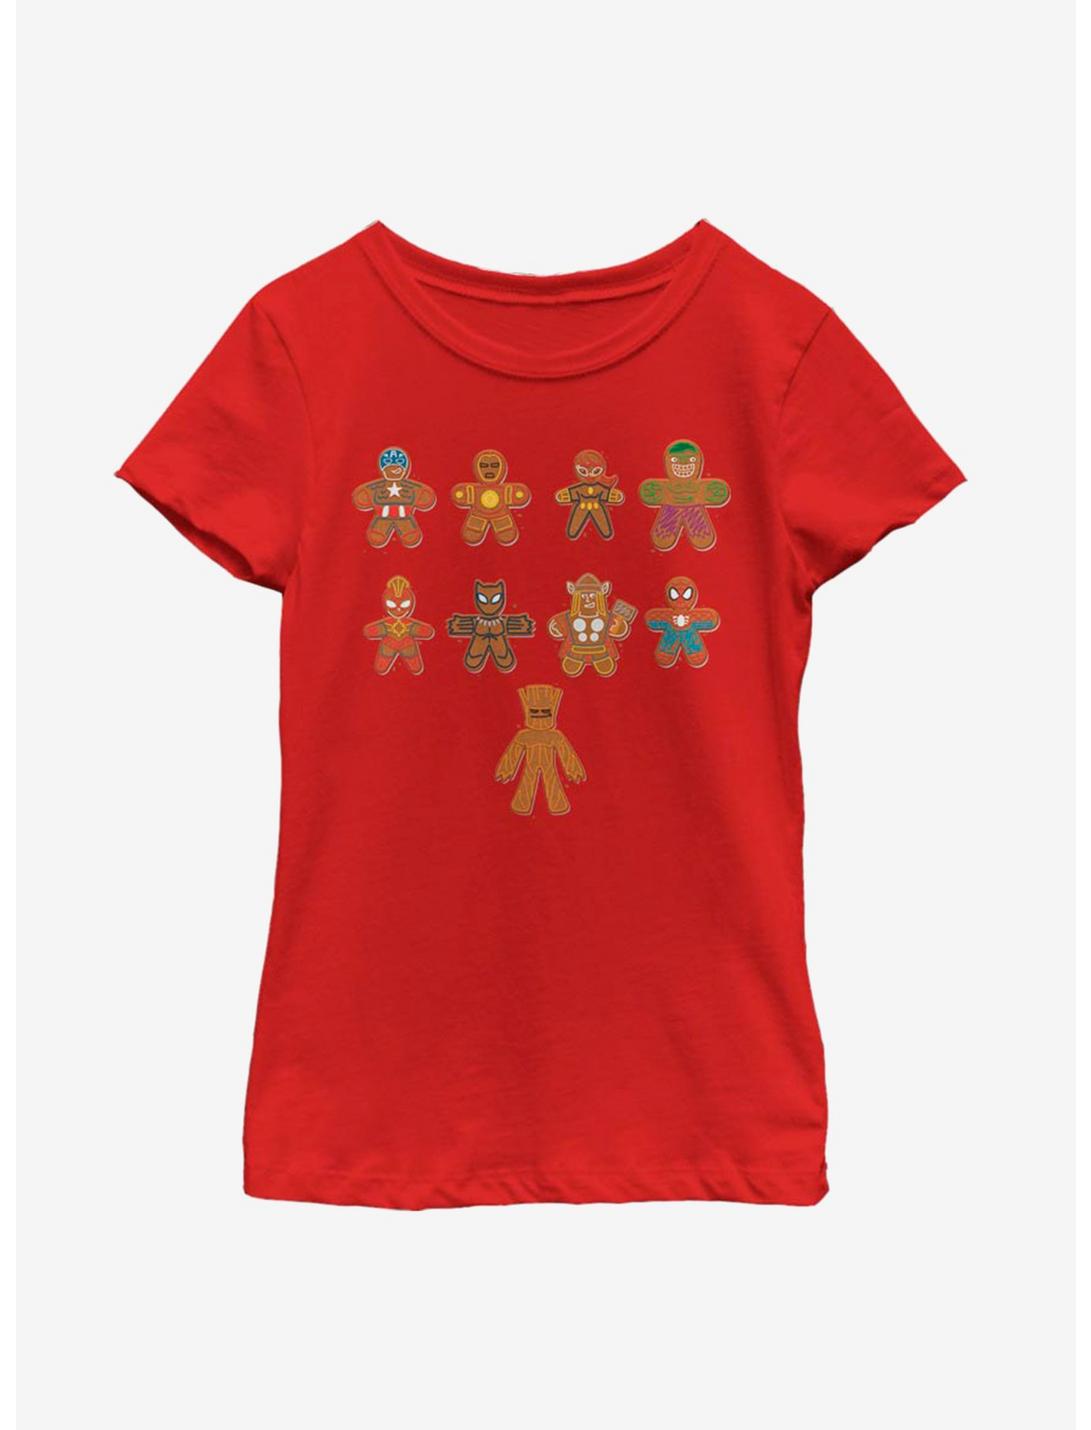 Marvel Avengers Lined Up Cookies Youth Girls T-Shirt, RED, hi-res